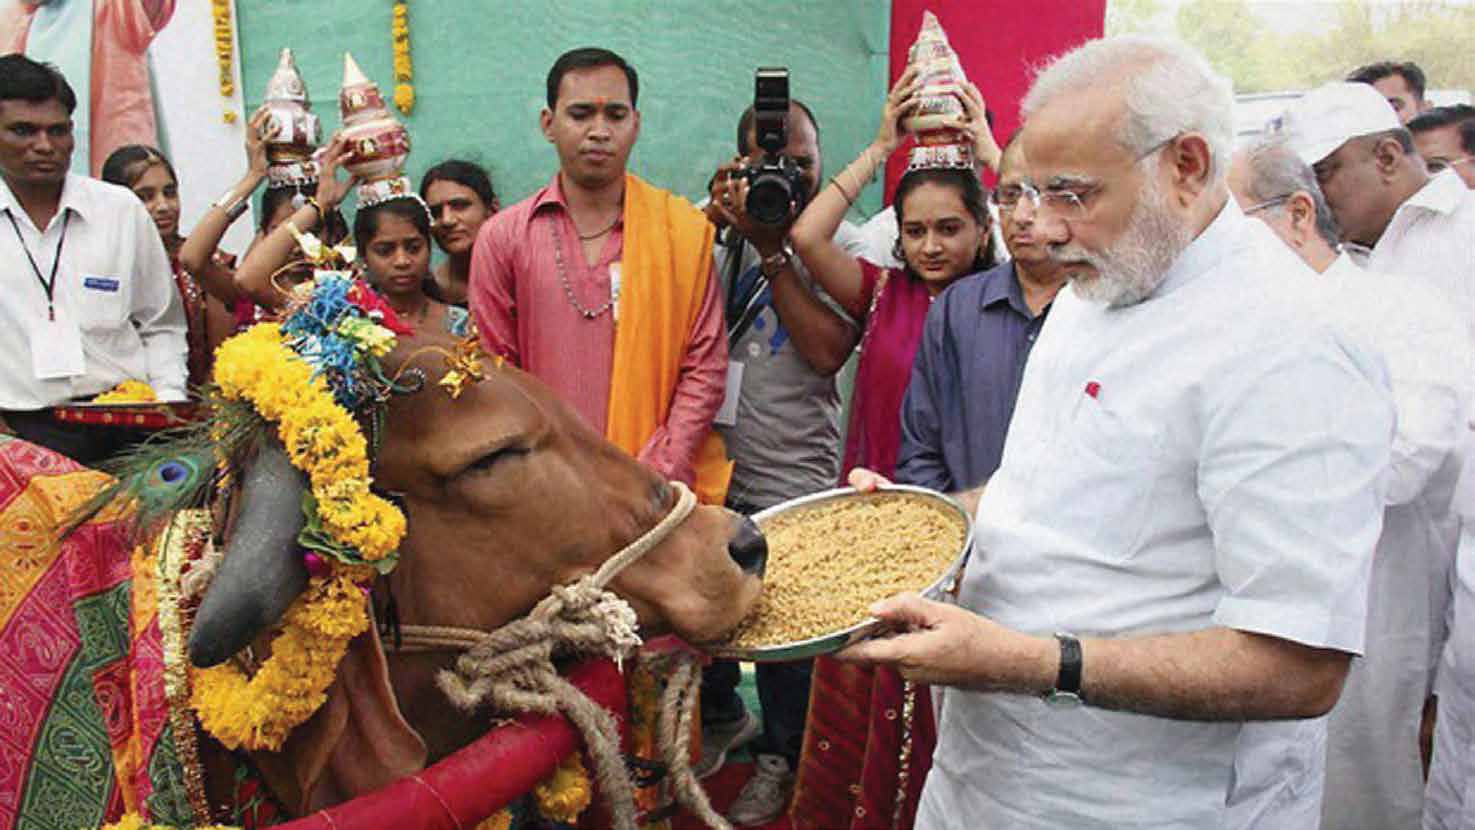 During his days as Gujarat CM, Modi promoted cow-protection groups